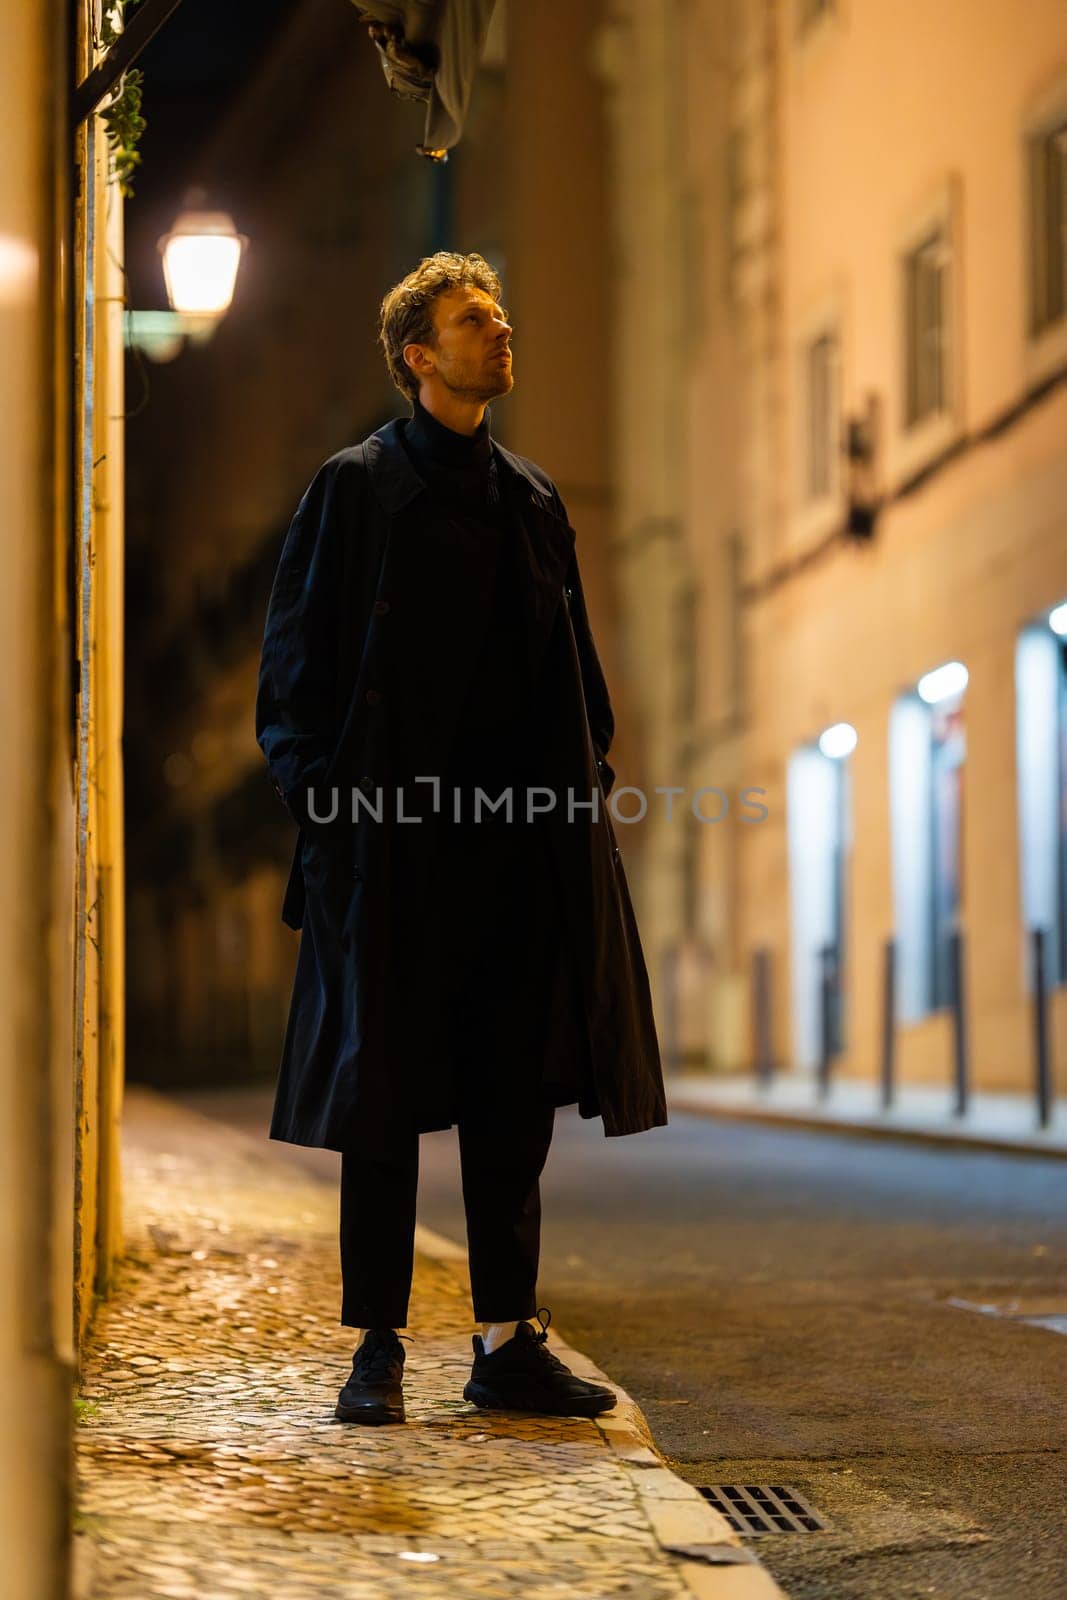 A man in black suit in a city street at night by Studia72